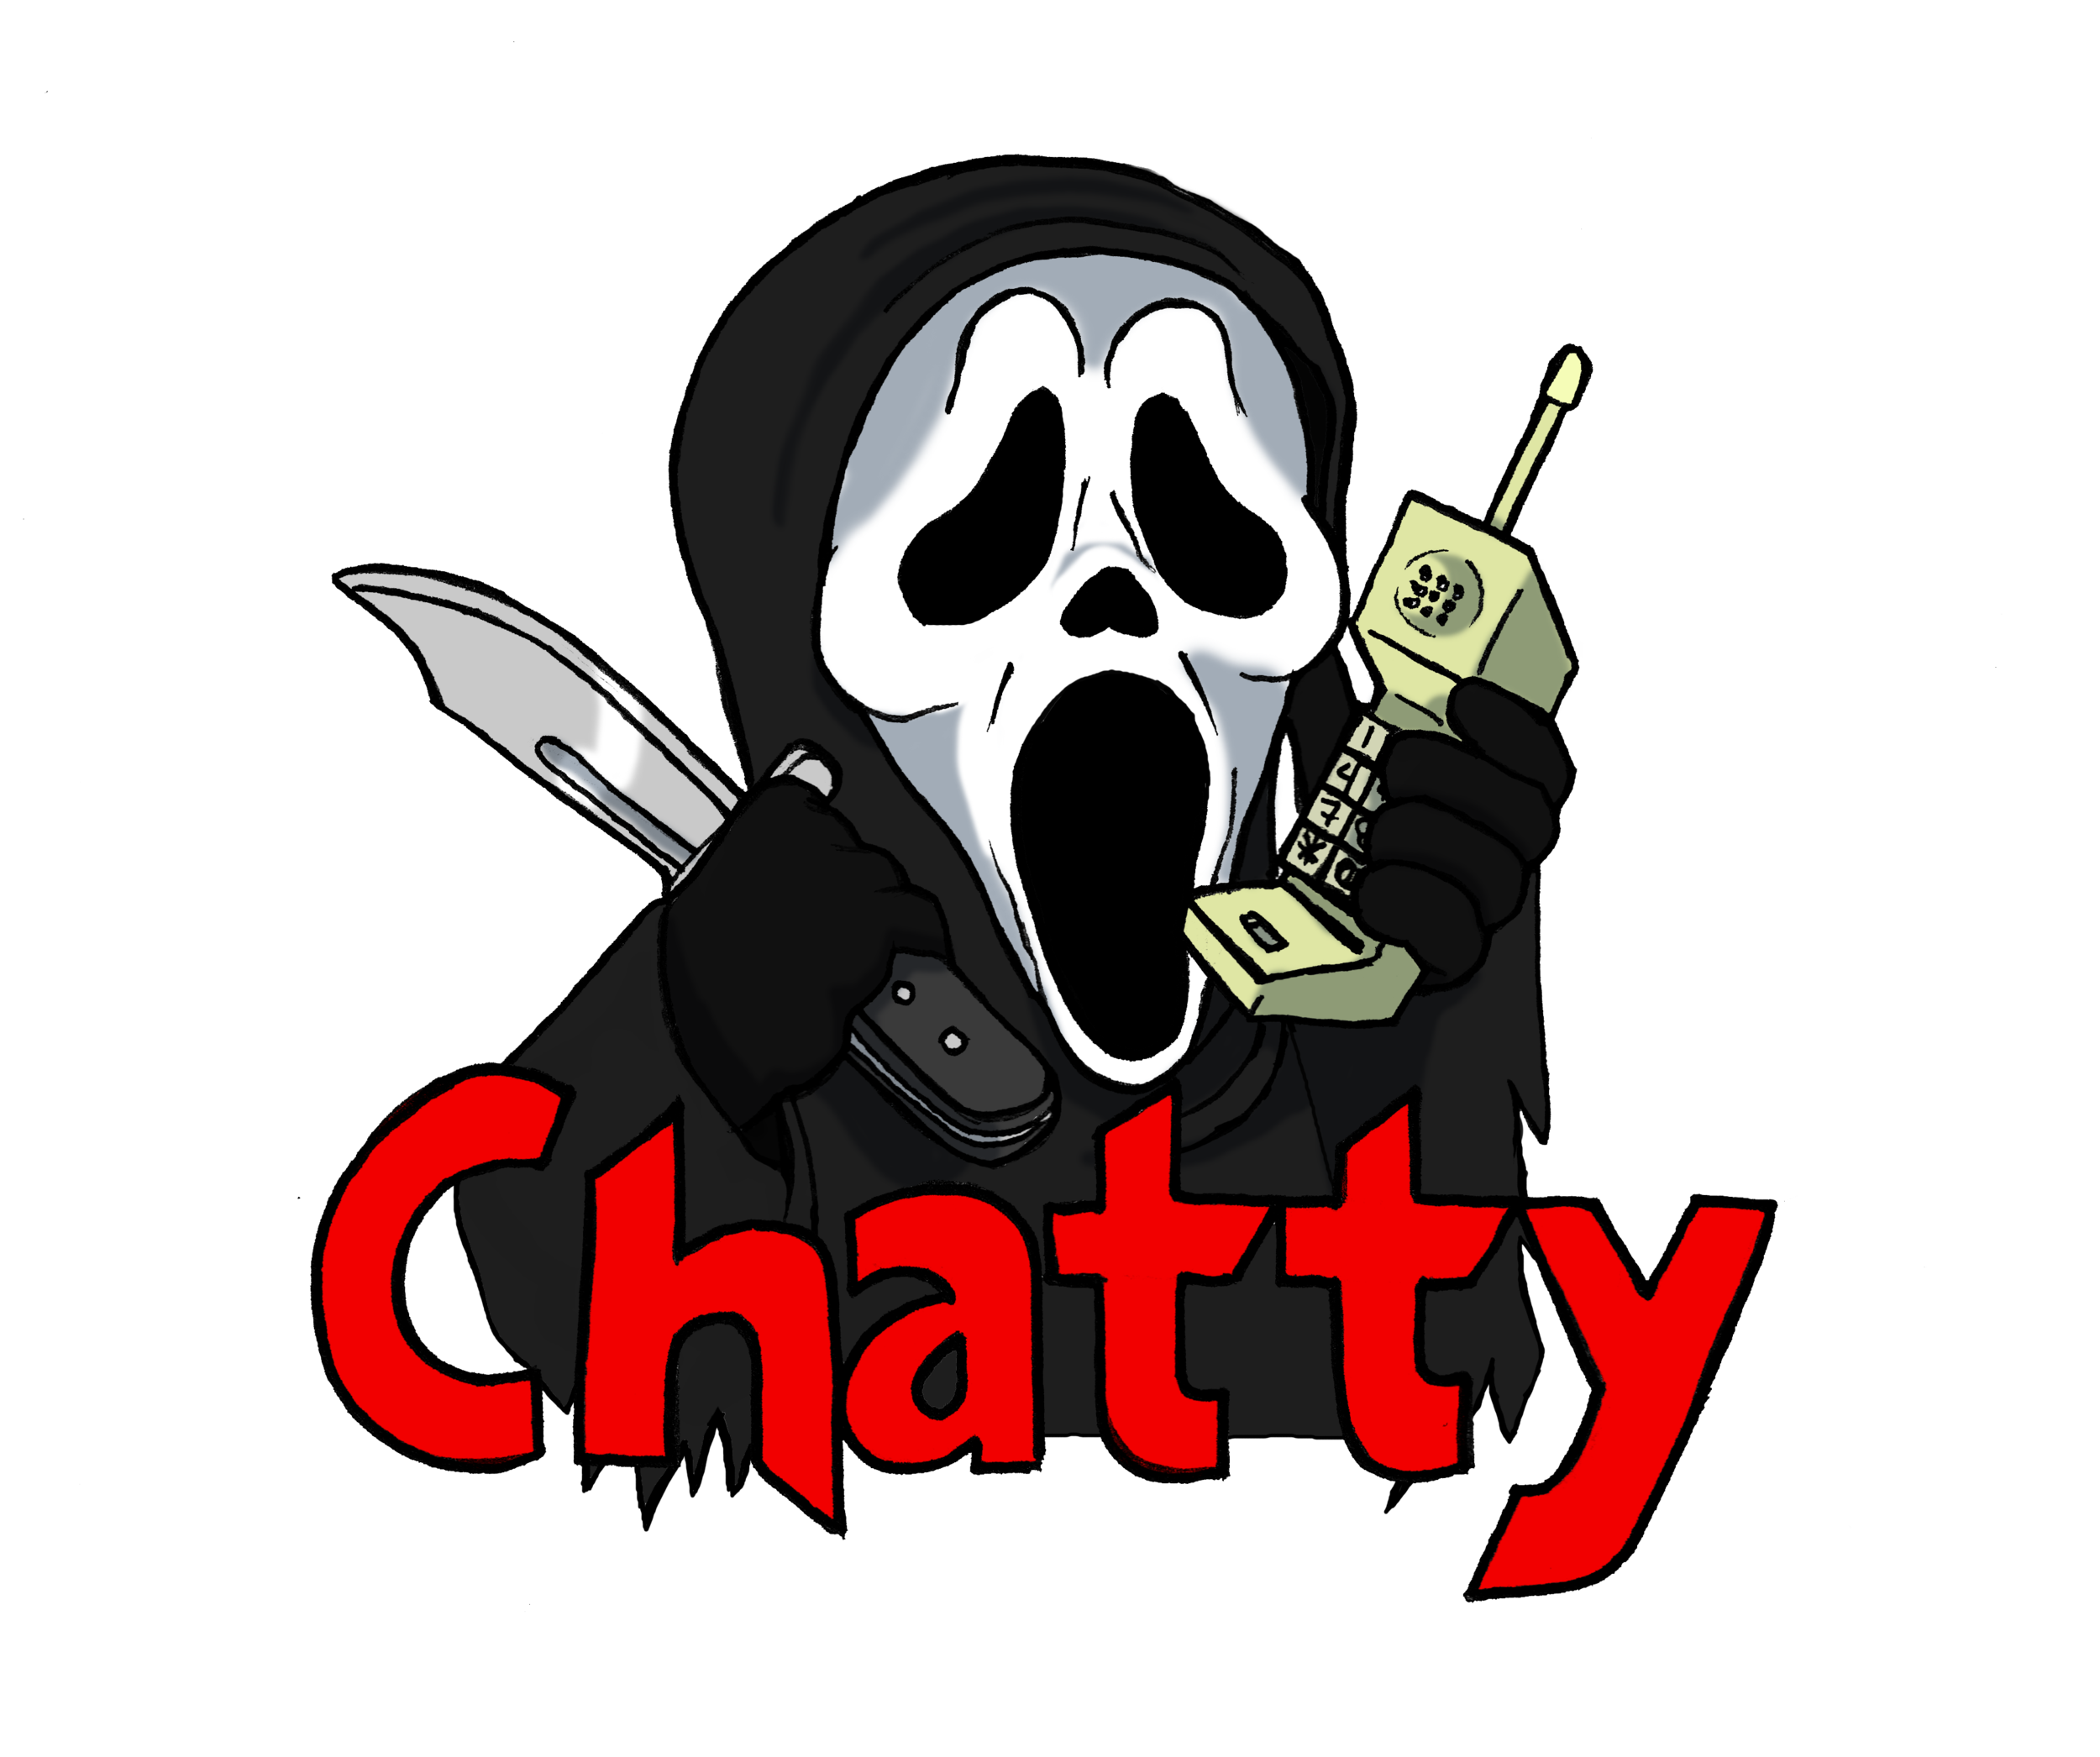 GhostFaceChatty.png